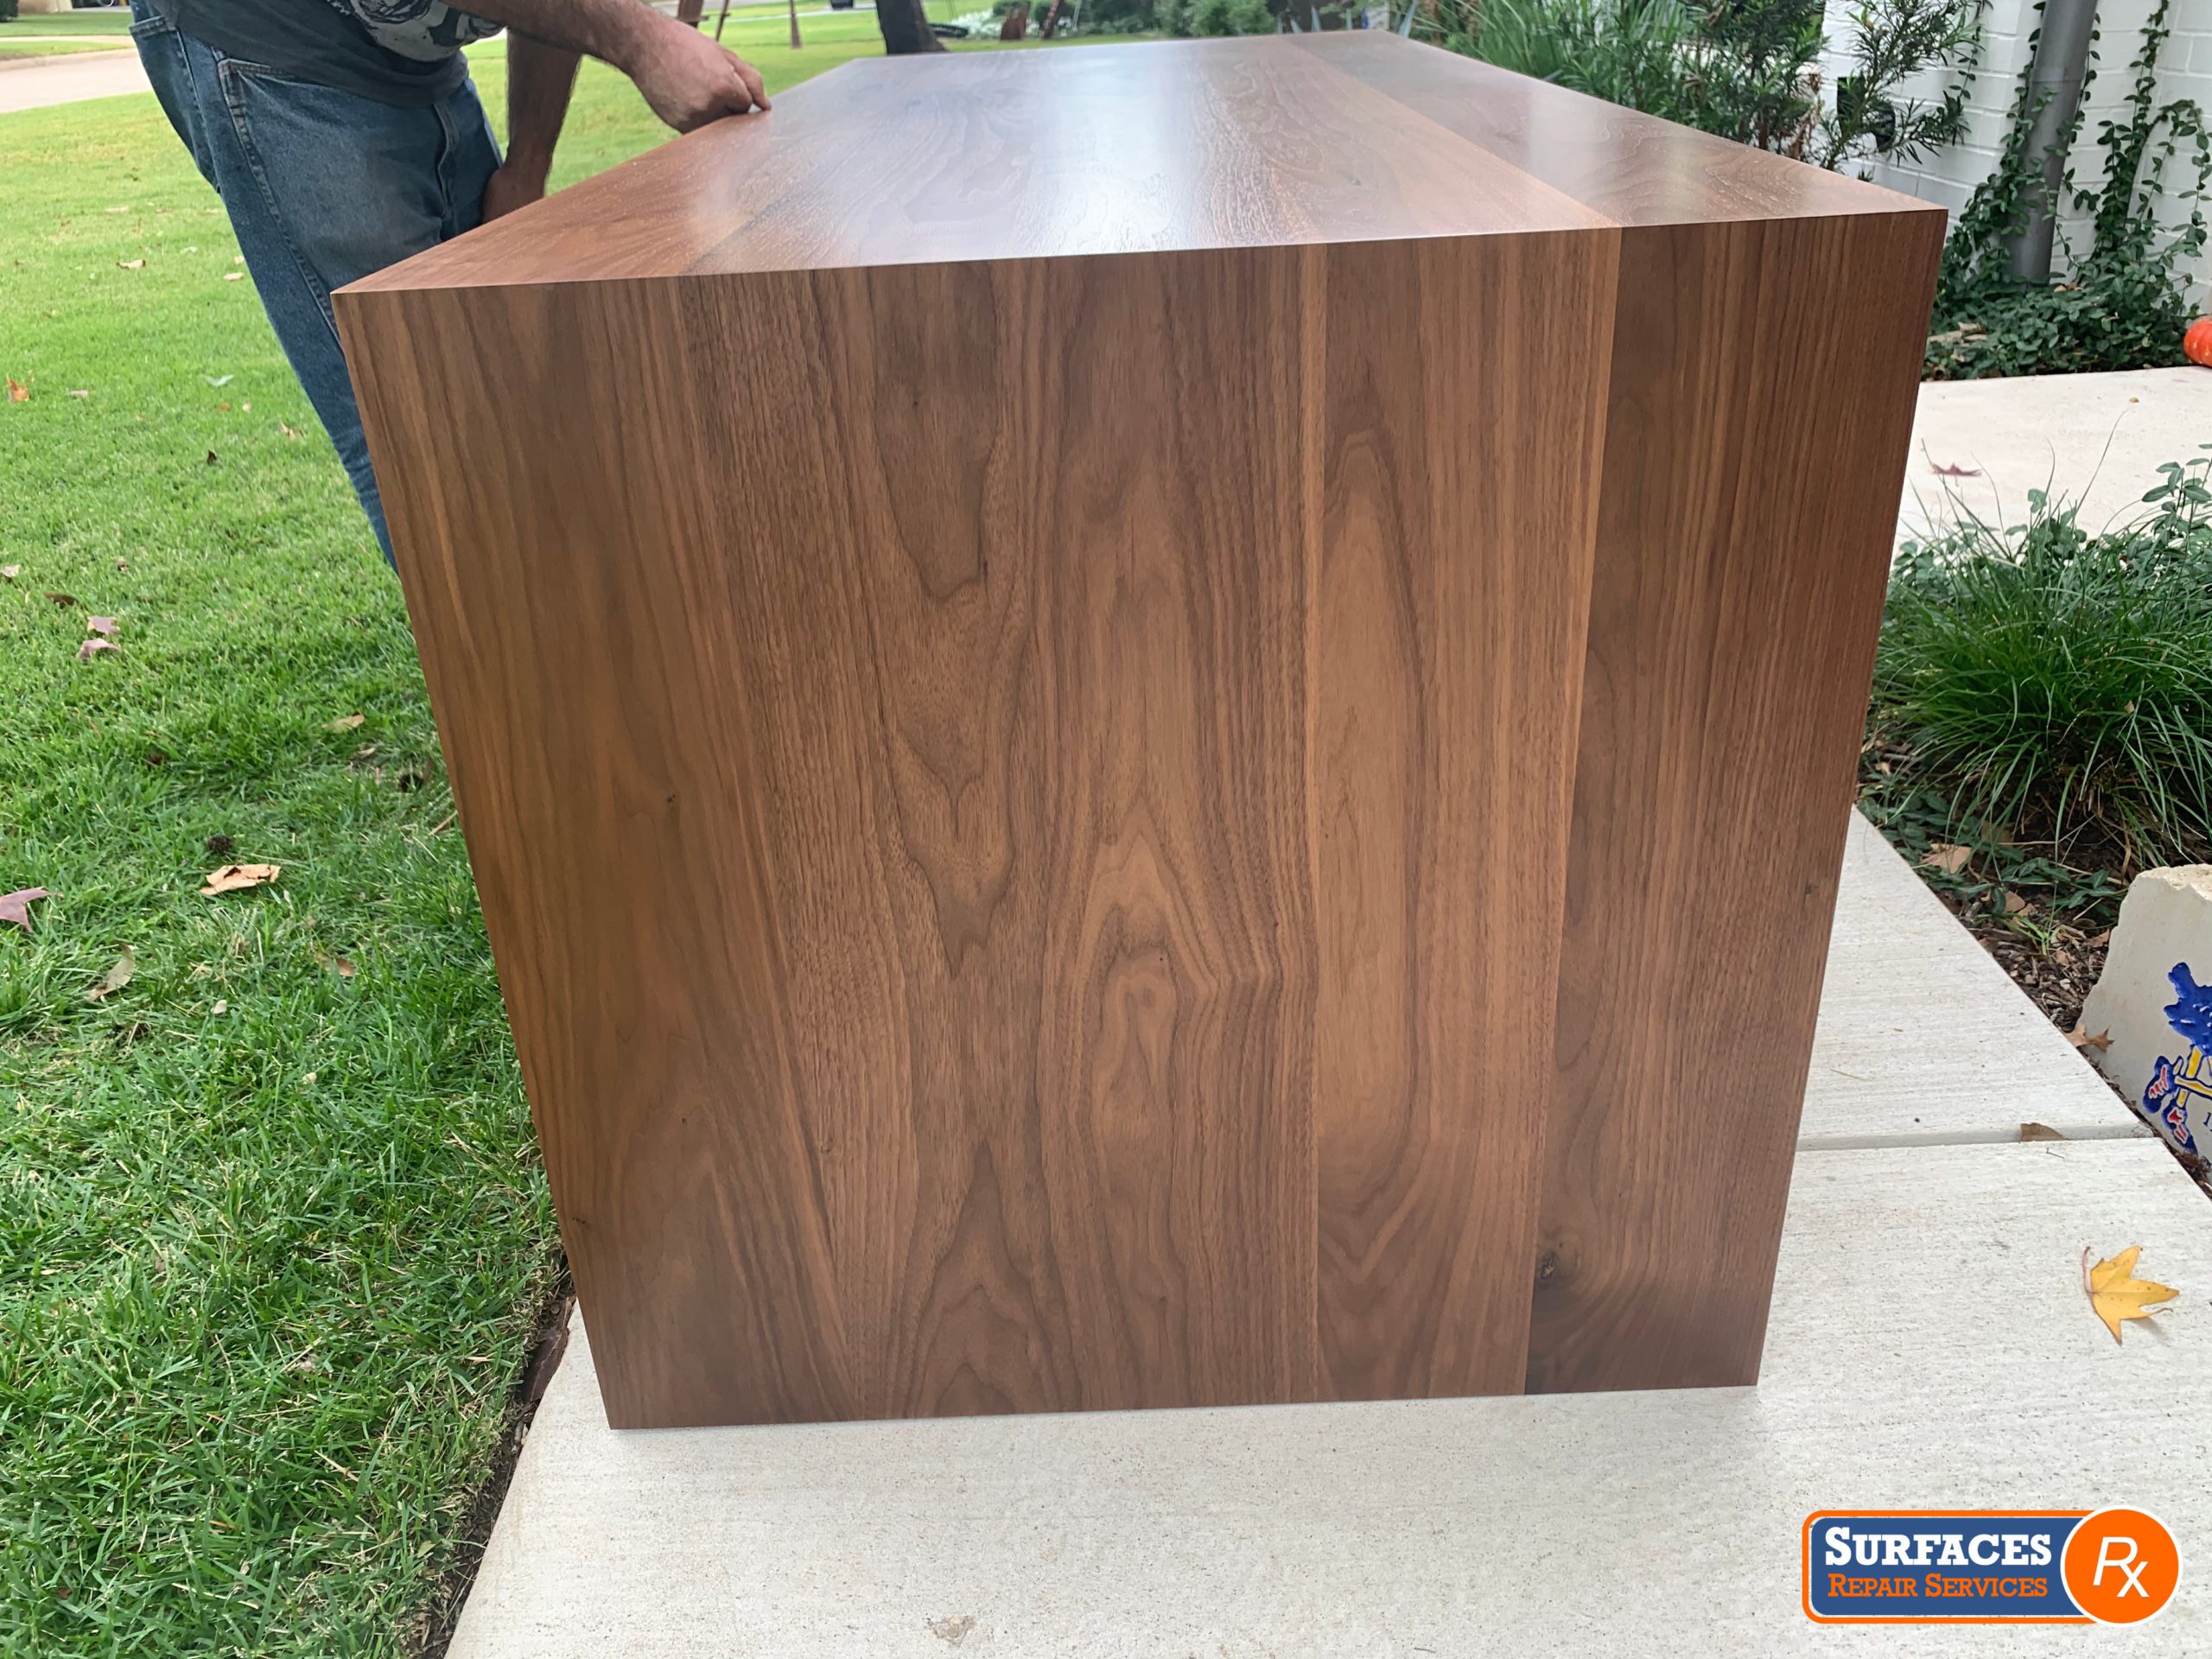 After Surfaces Rx Refinished New Walnut Desk in NE Dallas 